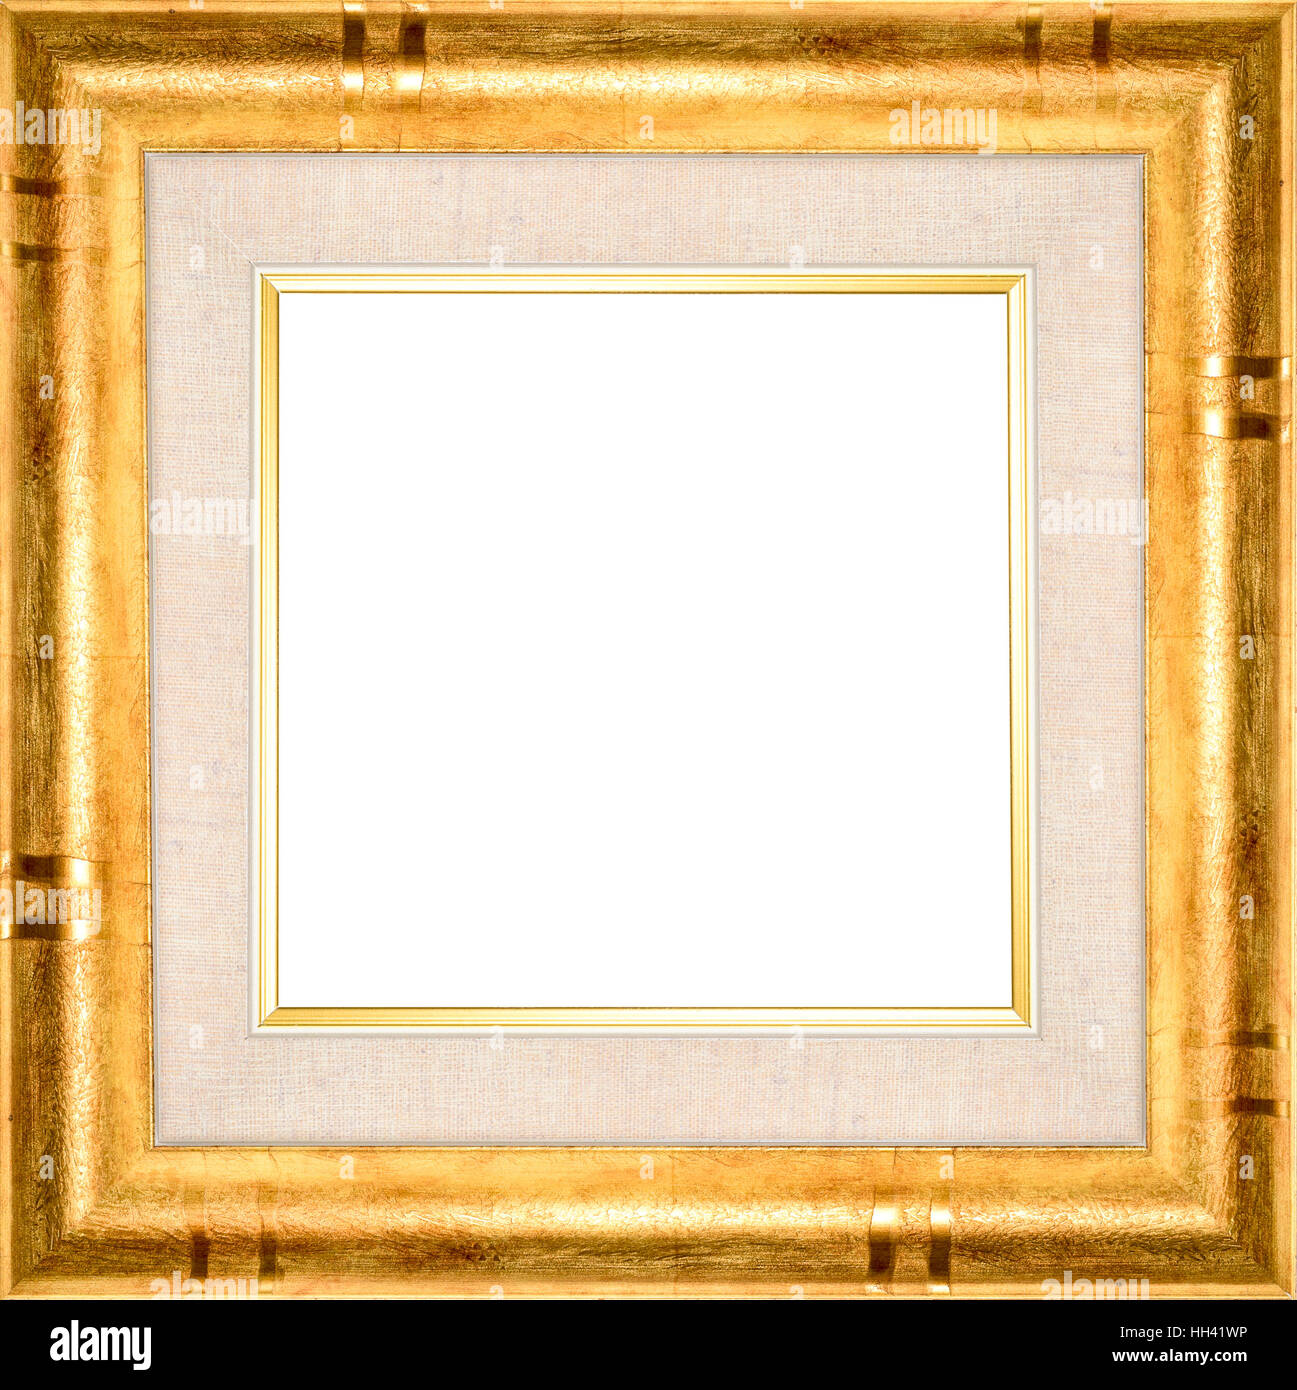 Wooden golden vintage picture frame isolated on white background. High resolution photo. Stock Photo